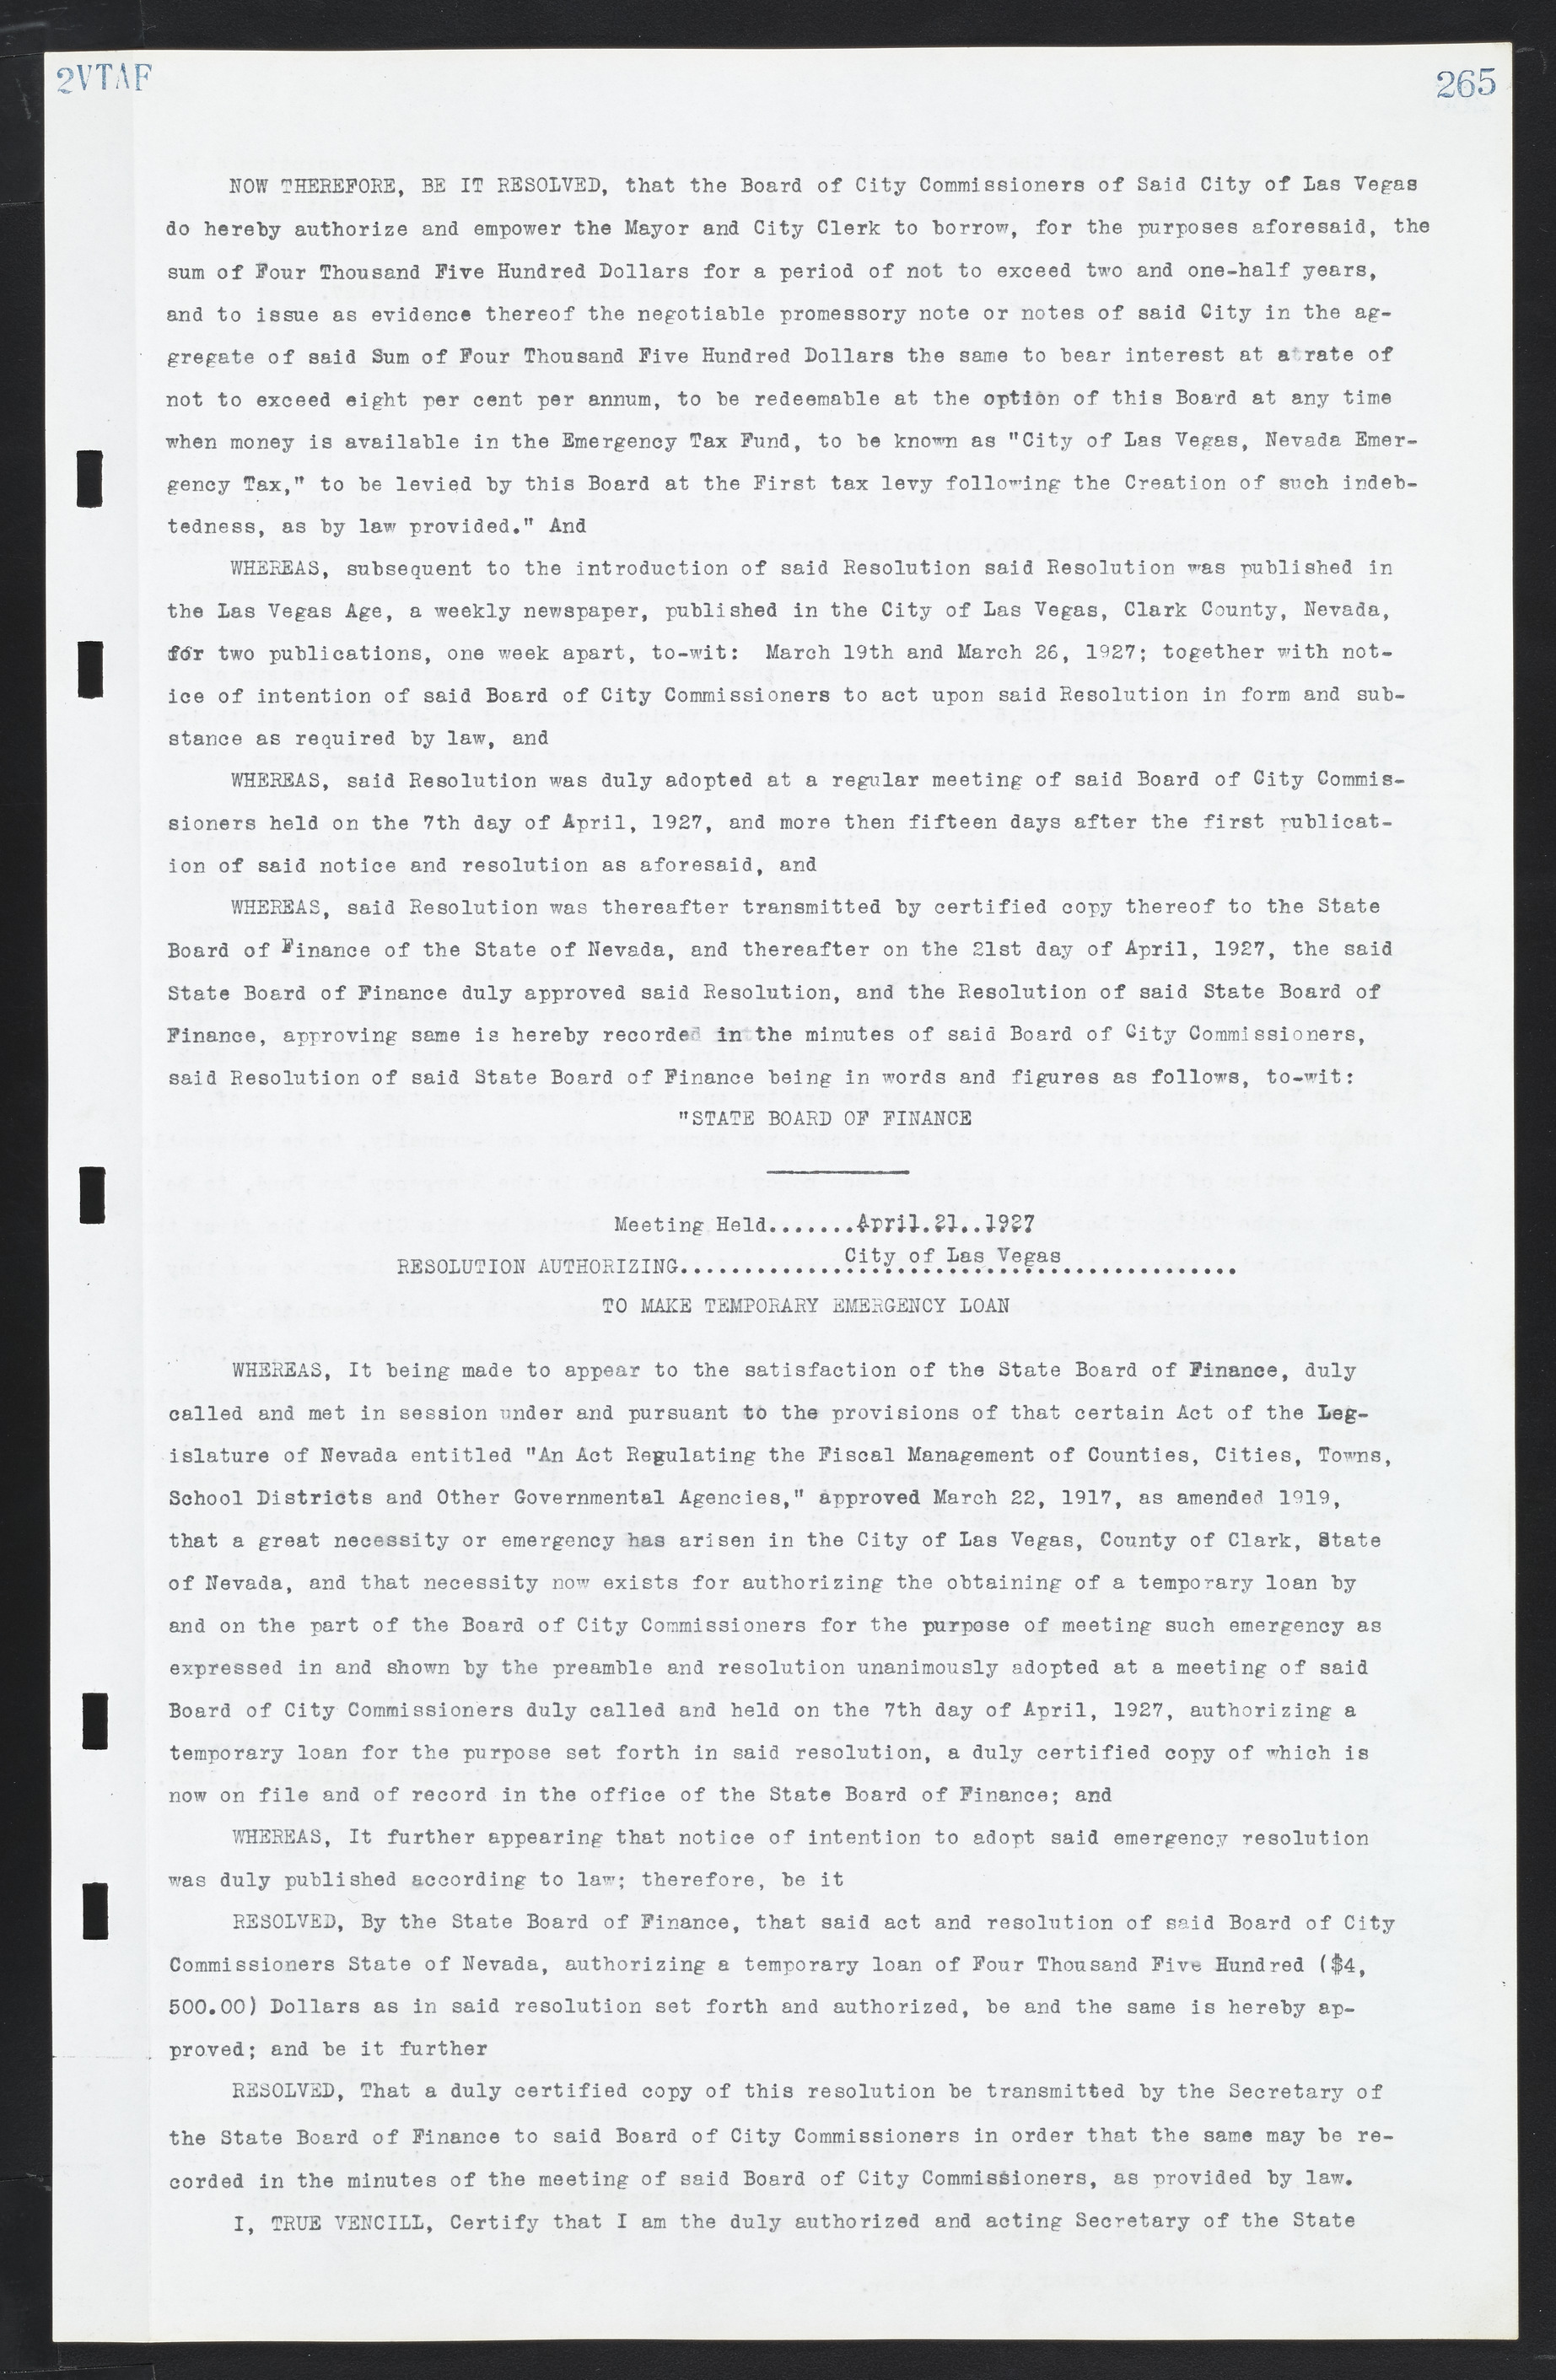 Las Vegas City Commission Minutes, March 1, 1922 to May 10, 1929, lvc000002-274